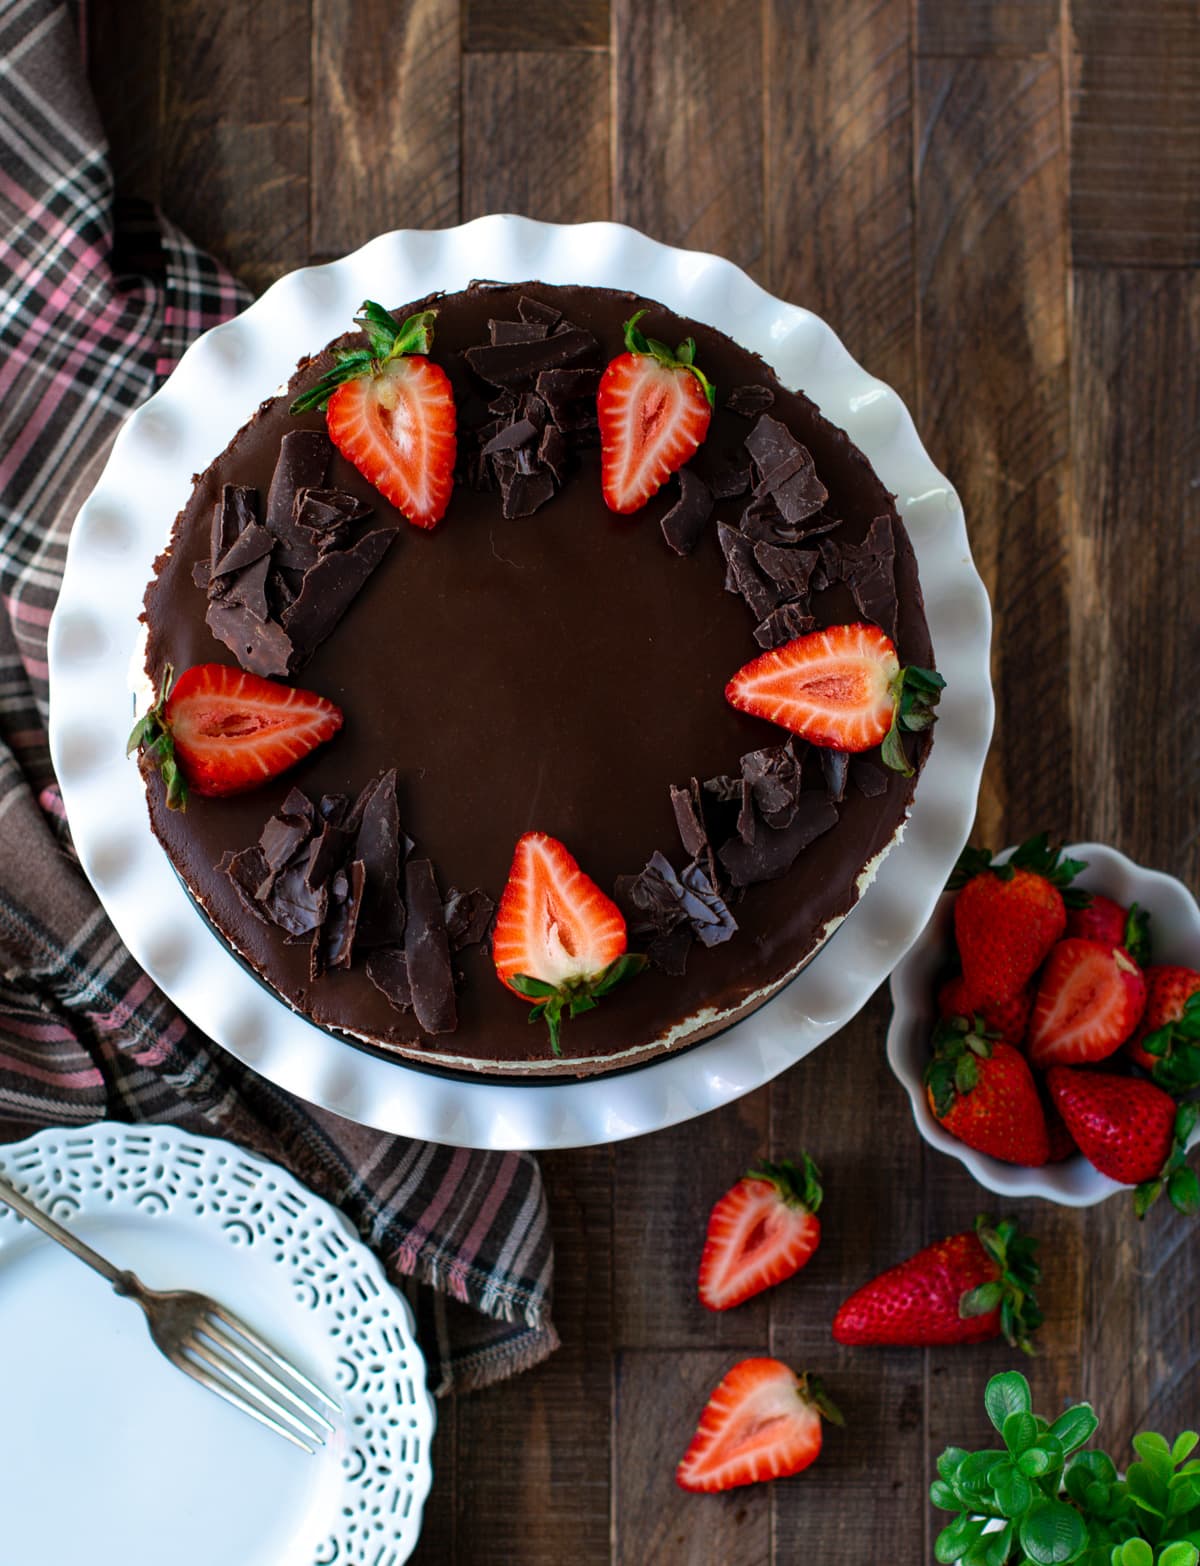 Mousse cake with strawberries on the top